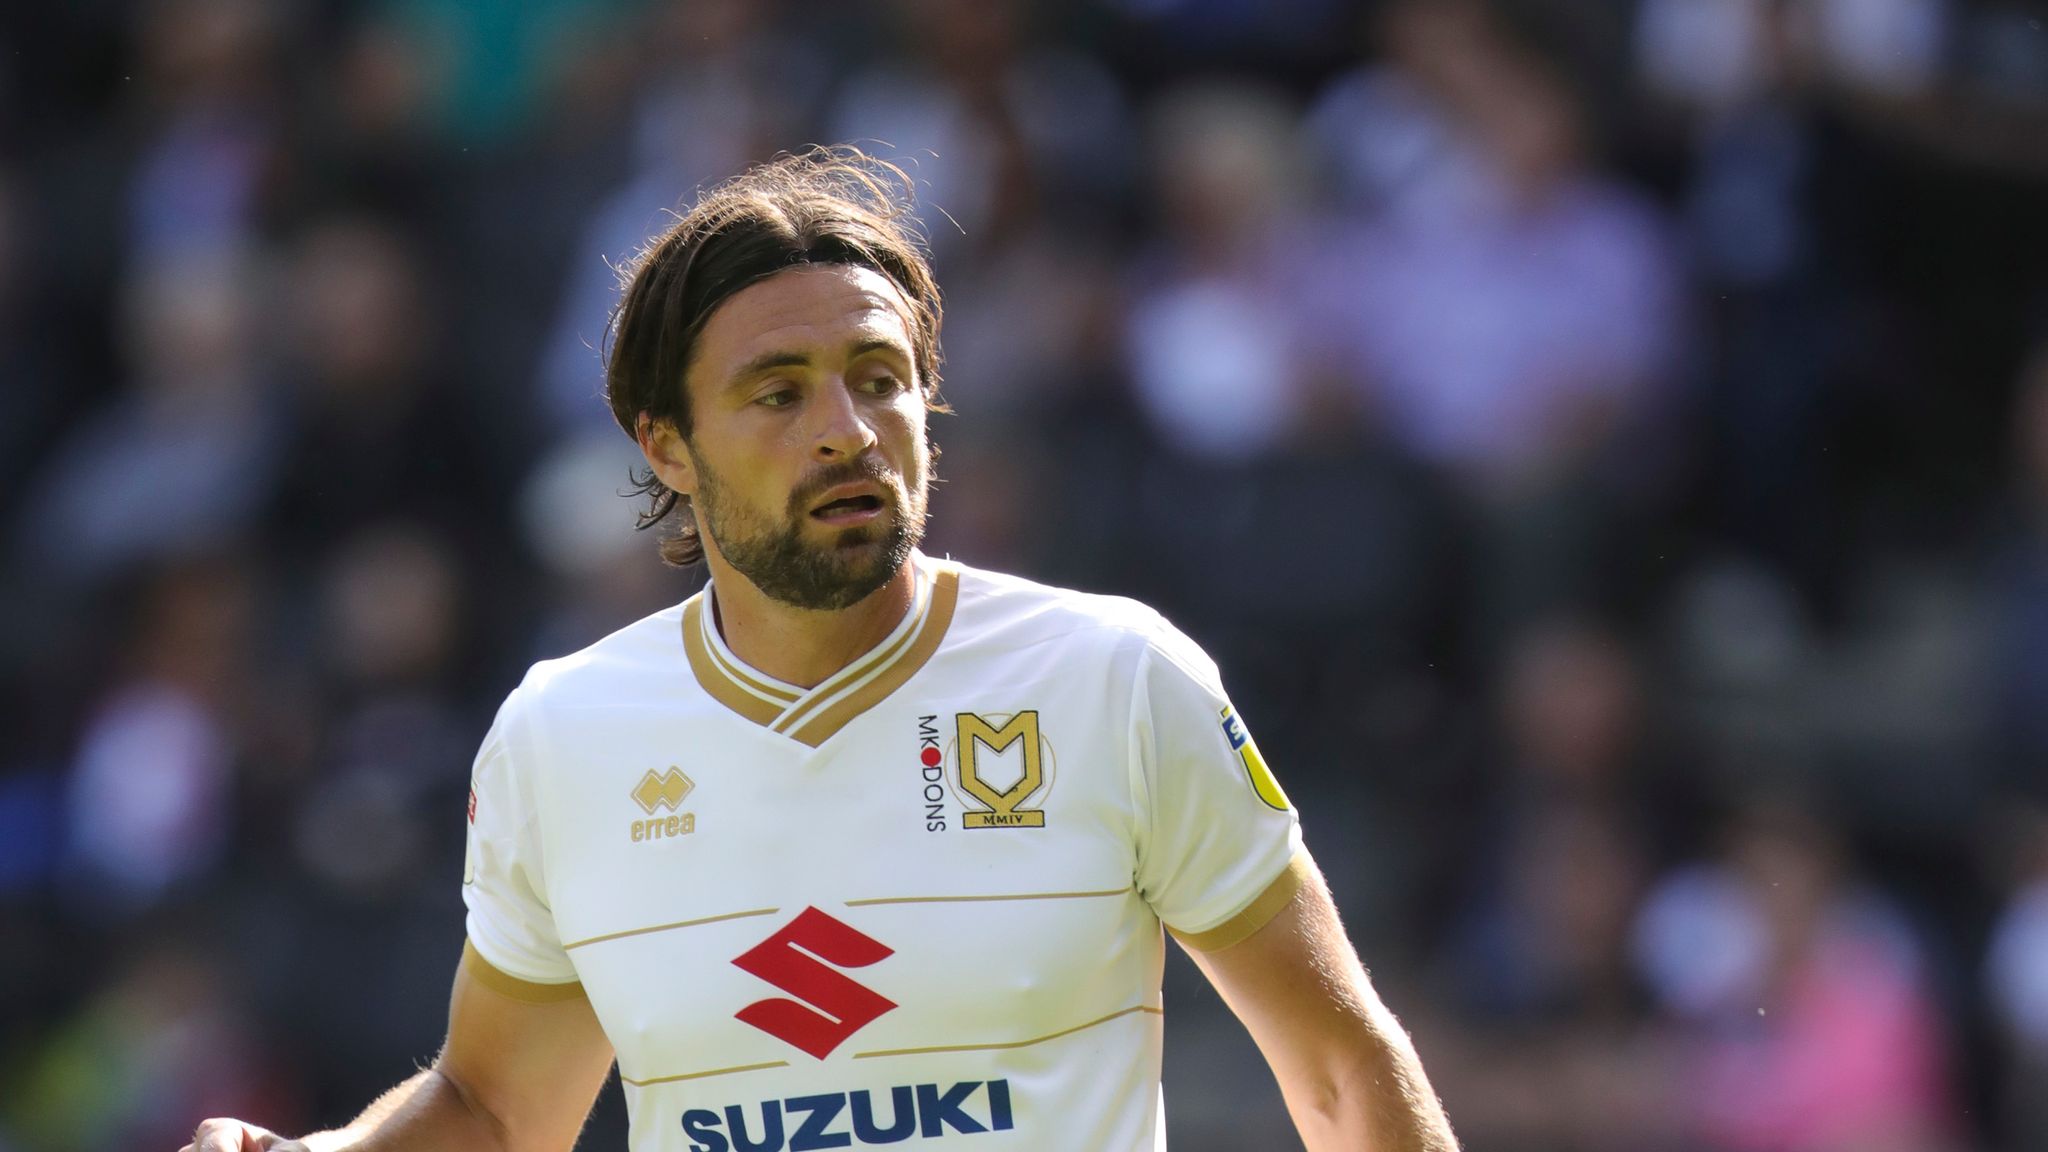 Experienced Defender Russell Martin Becomes MK Dons' First January